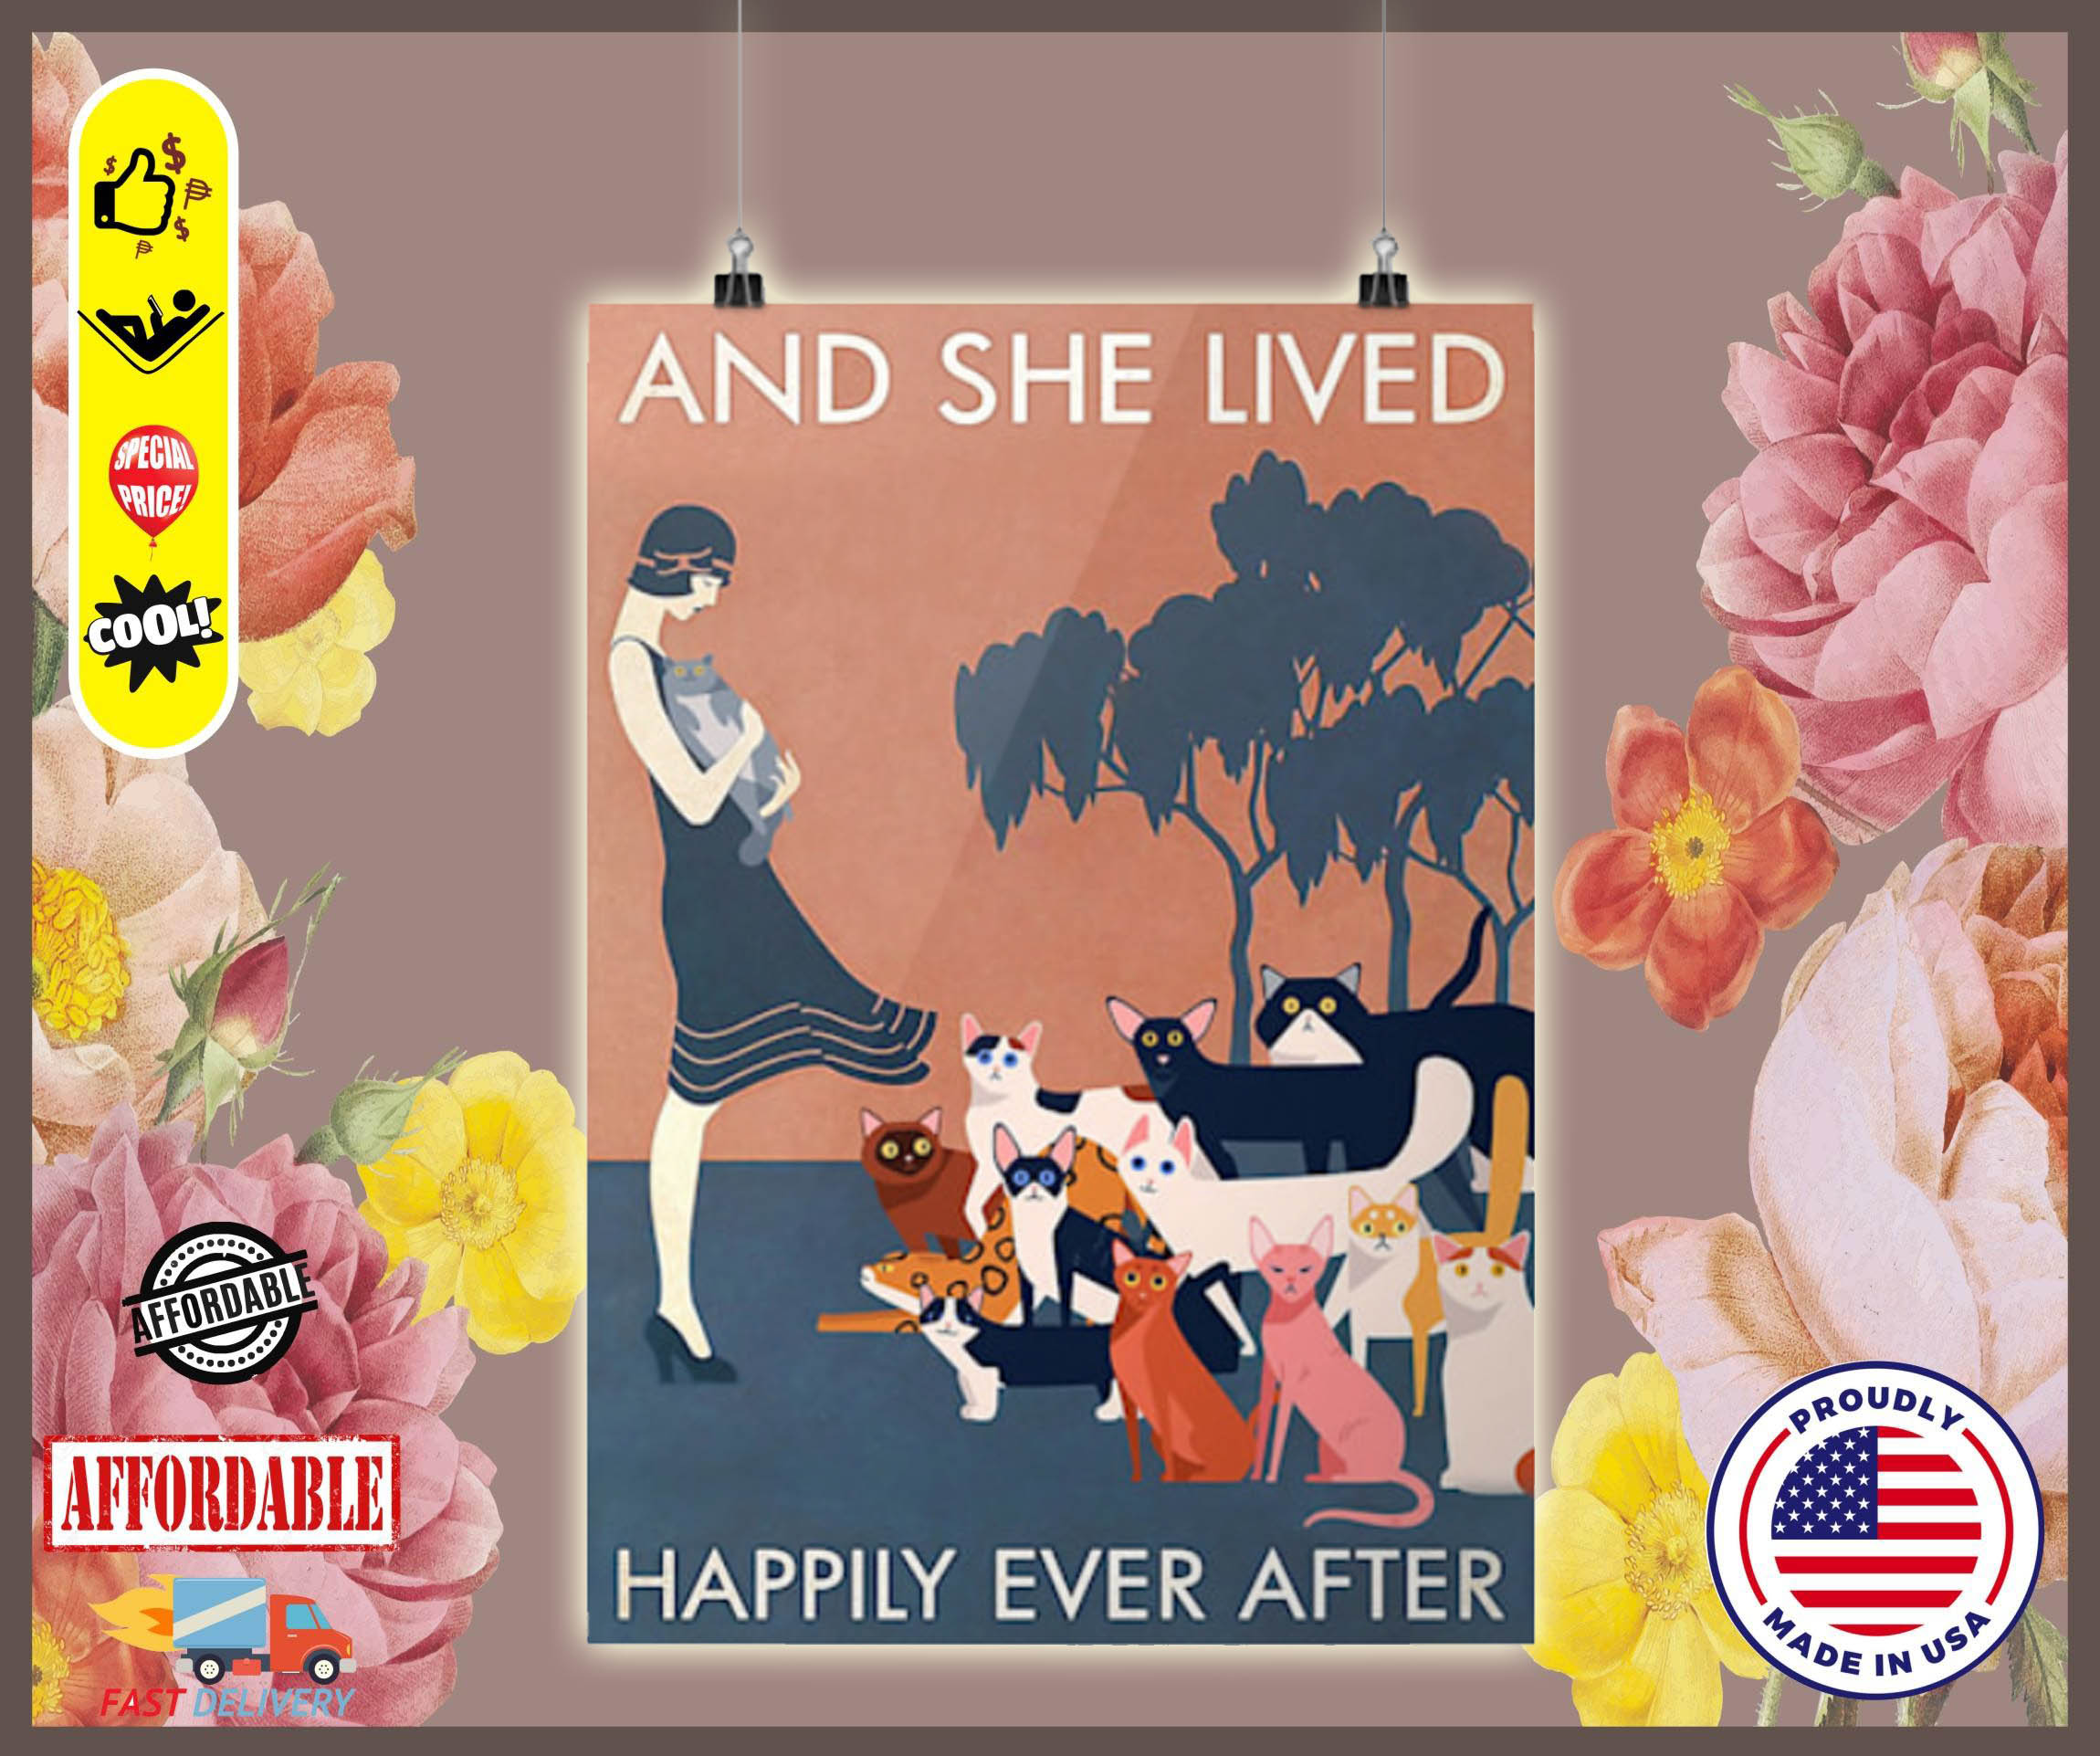 Cat and she lived happily ever after poster 2